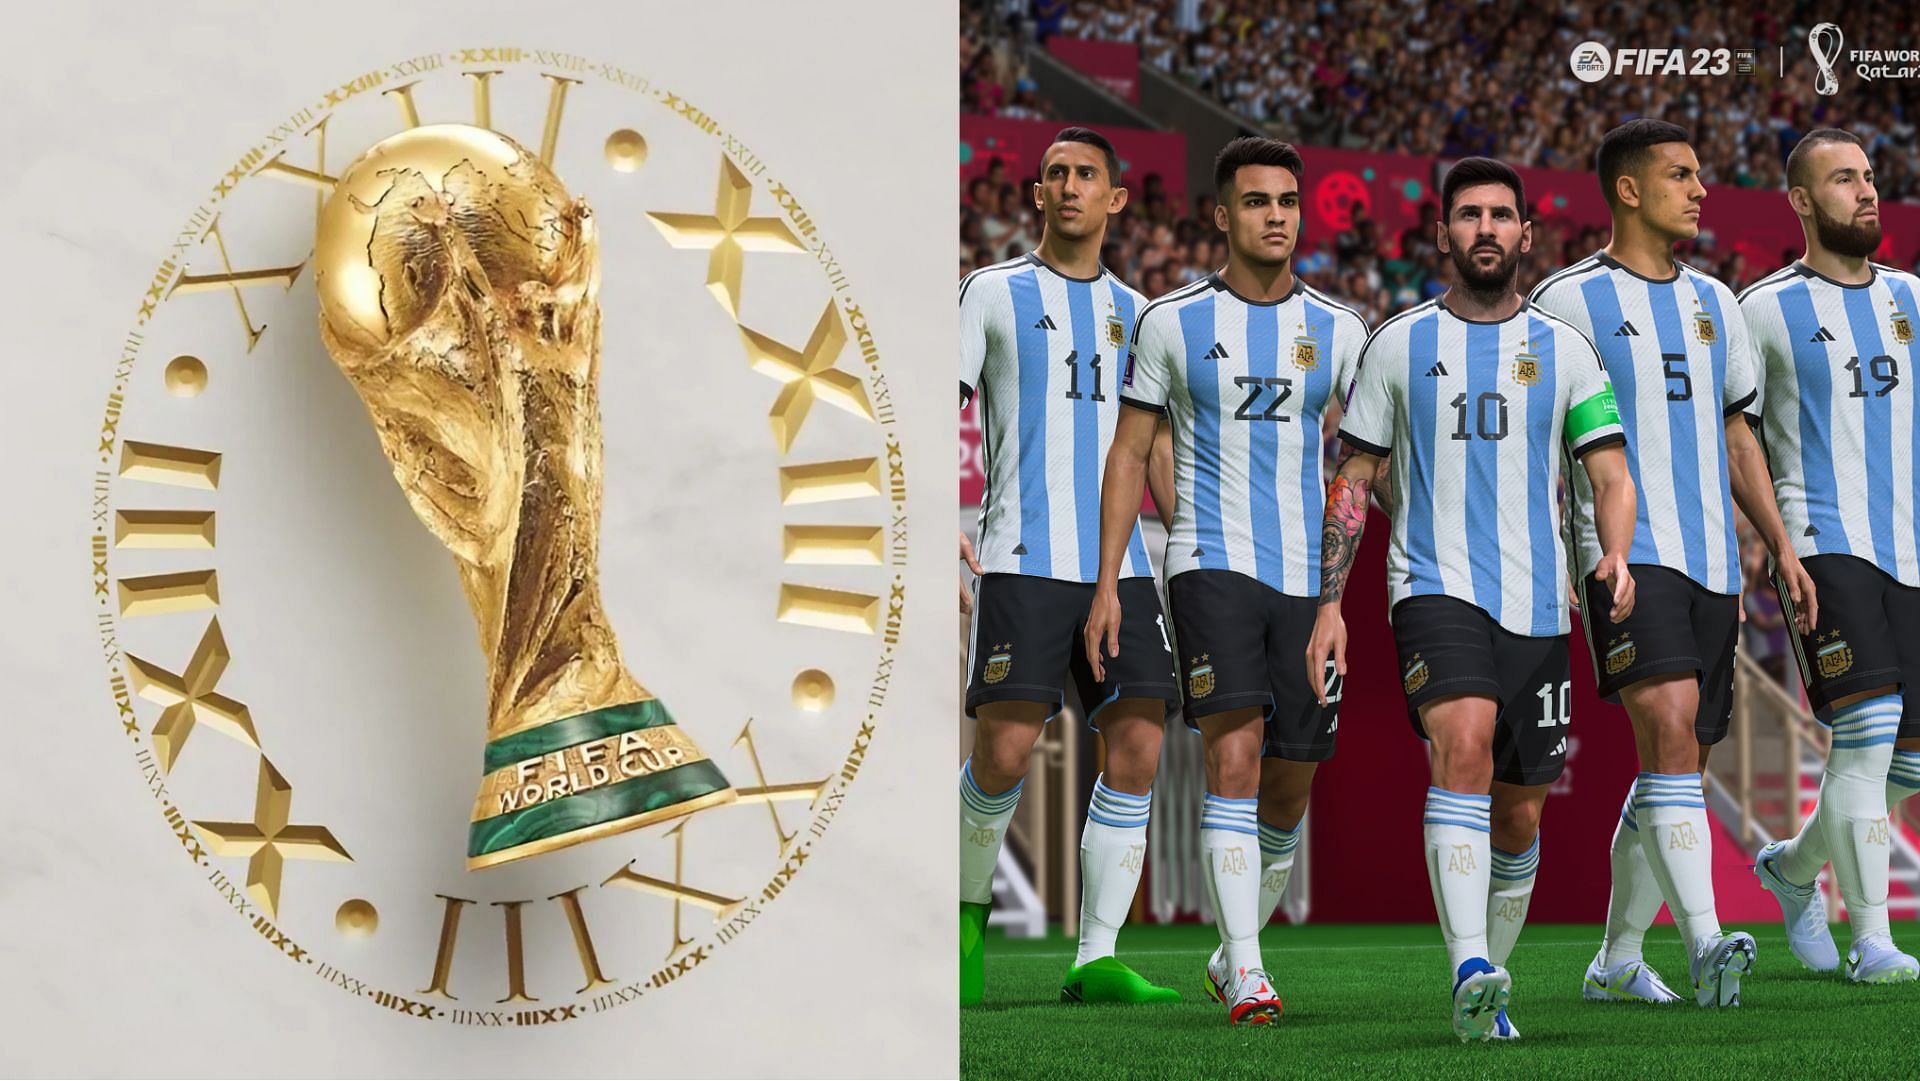 FIFA 23 is trying to correctly predict the World Cup winner for